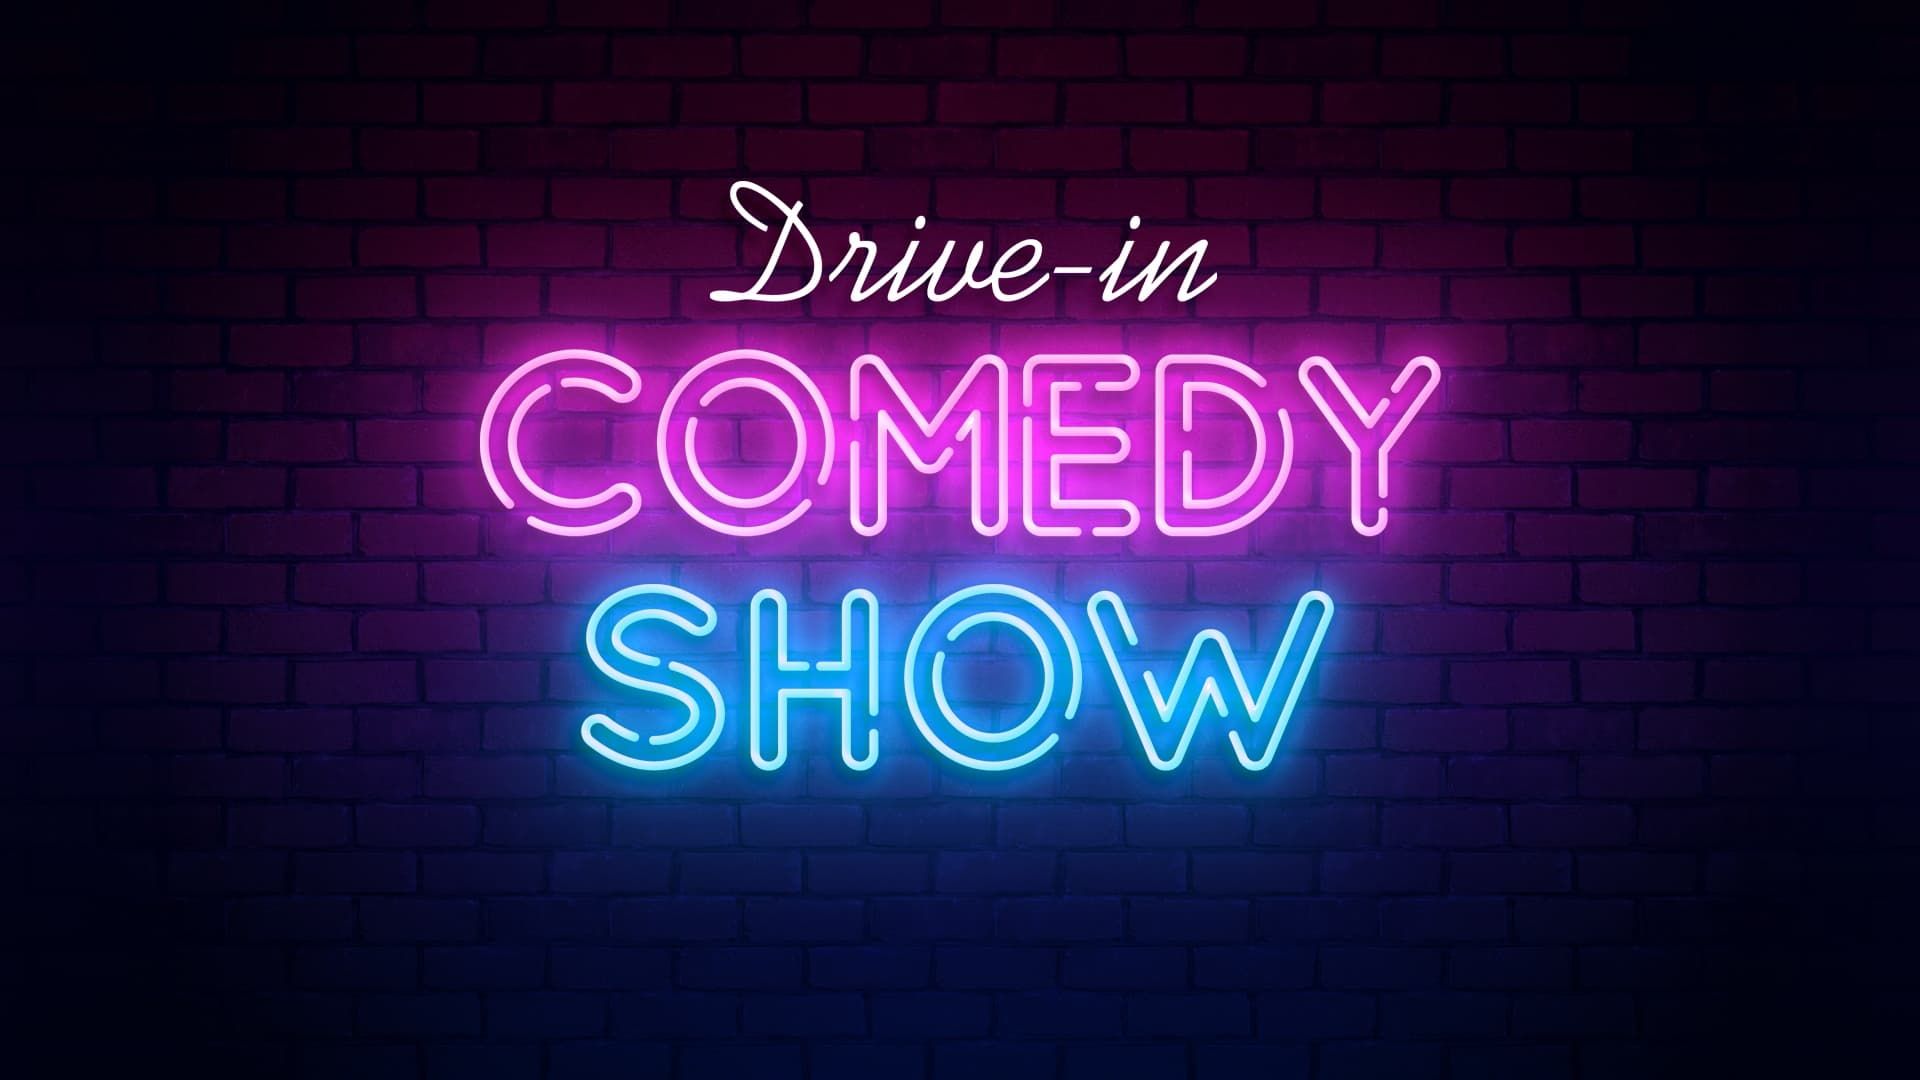 Drive in Comedy Show background